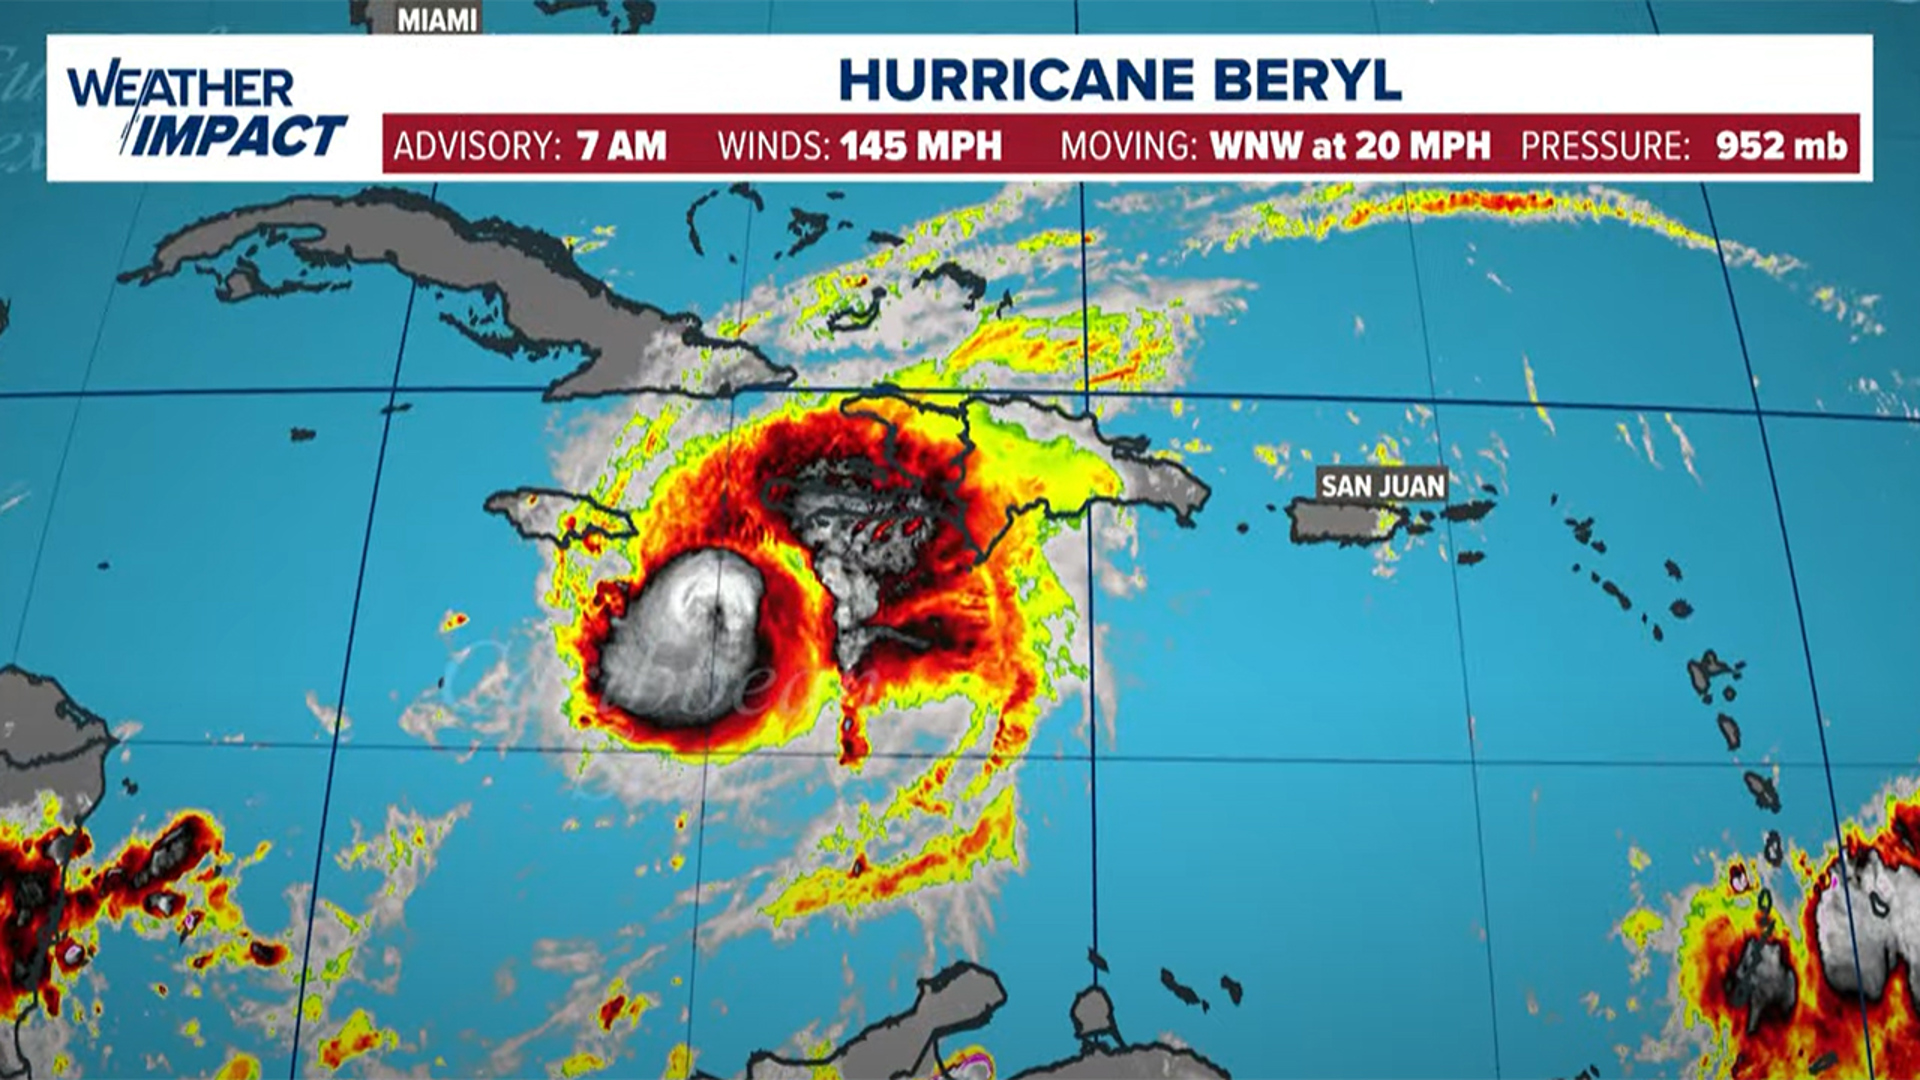 Hurricane Beryl is moving through the Caribbean, possibly toward the Gulf of Mexico. The maps on this live stream will continue to update.